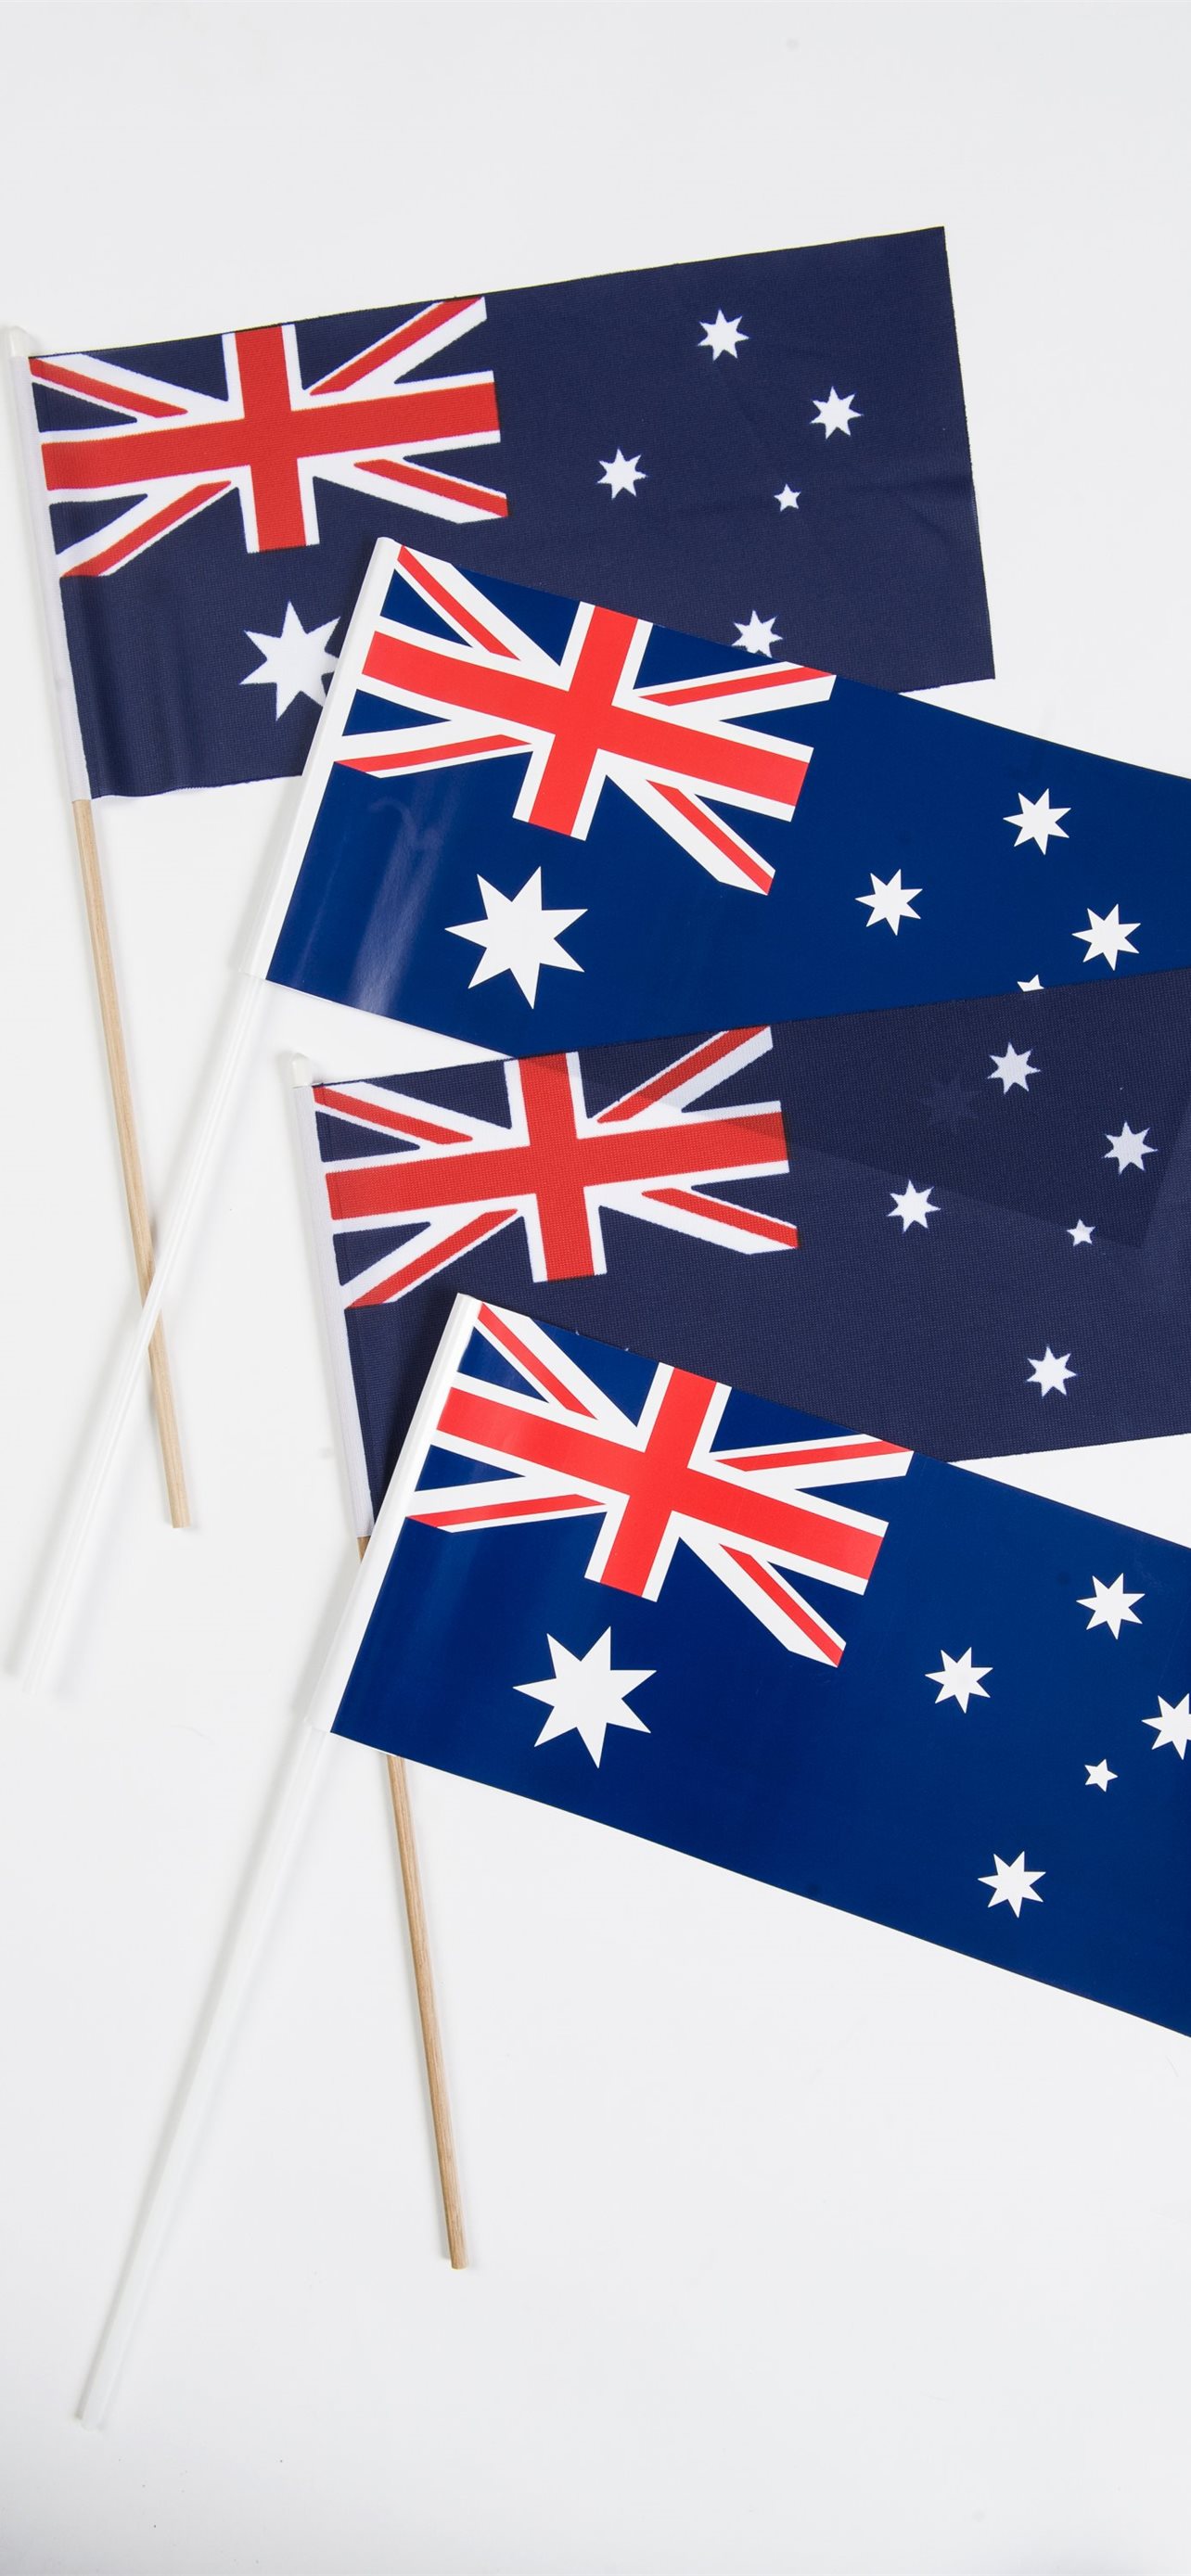 60+ Australia wallpapers phone | Download Free backgrounds